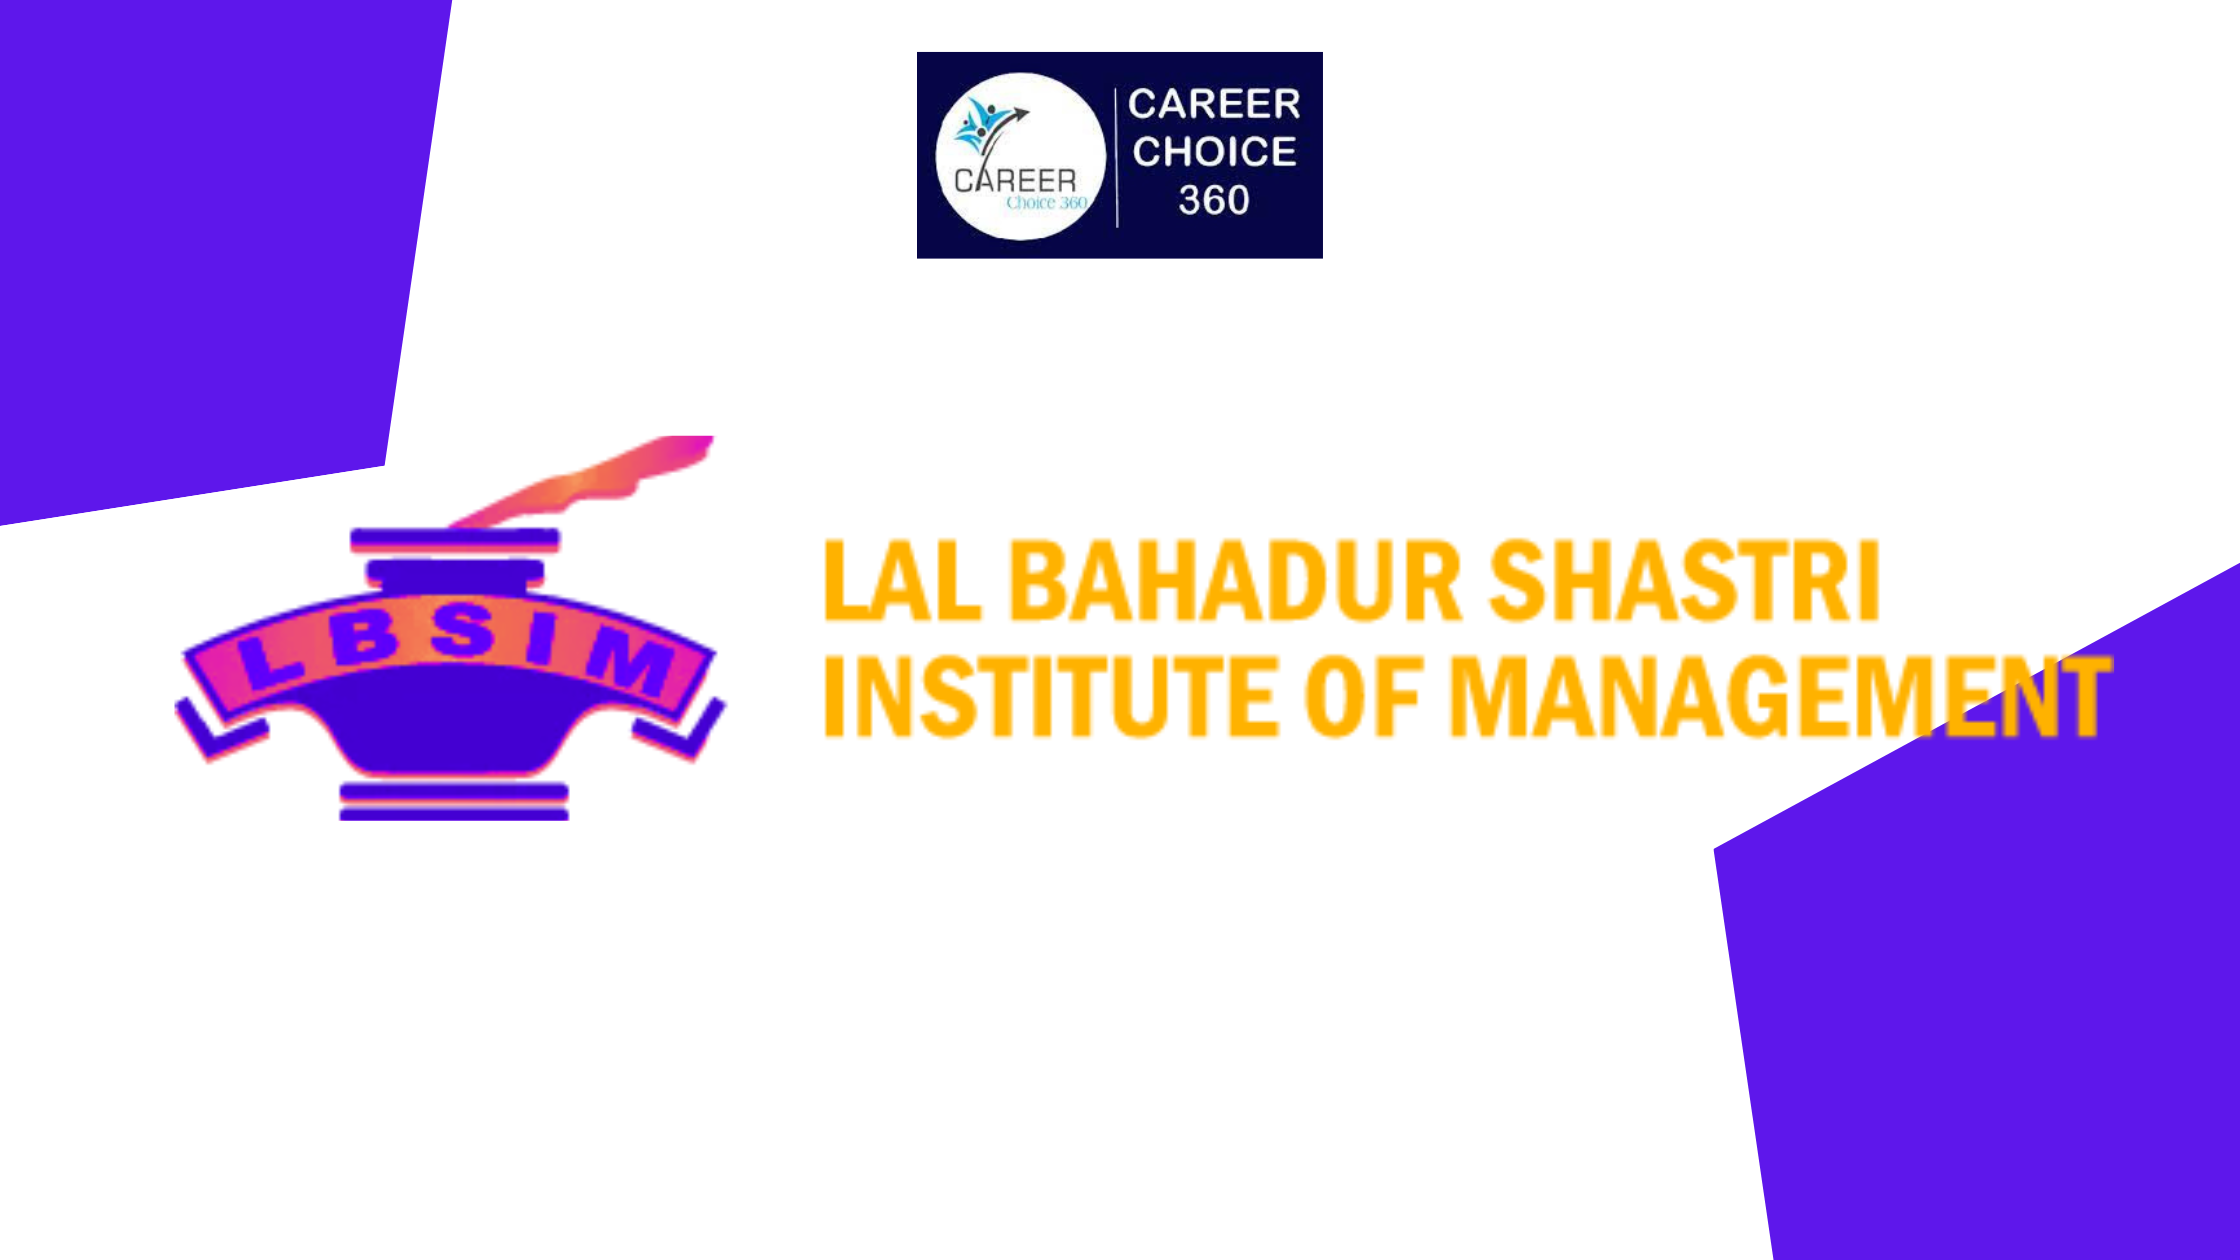 You are currently viewing Lal Bahadur Shastri Institute of Management (LBSIM) : Highlights, course, and placements